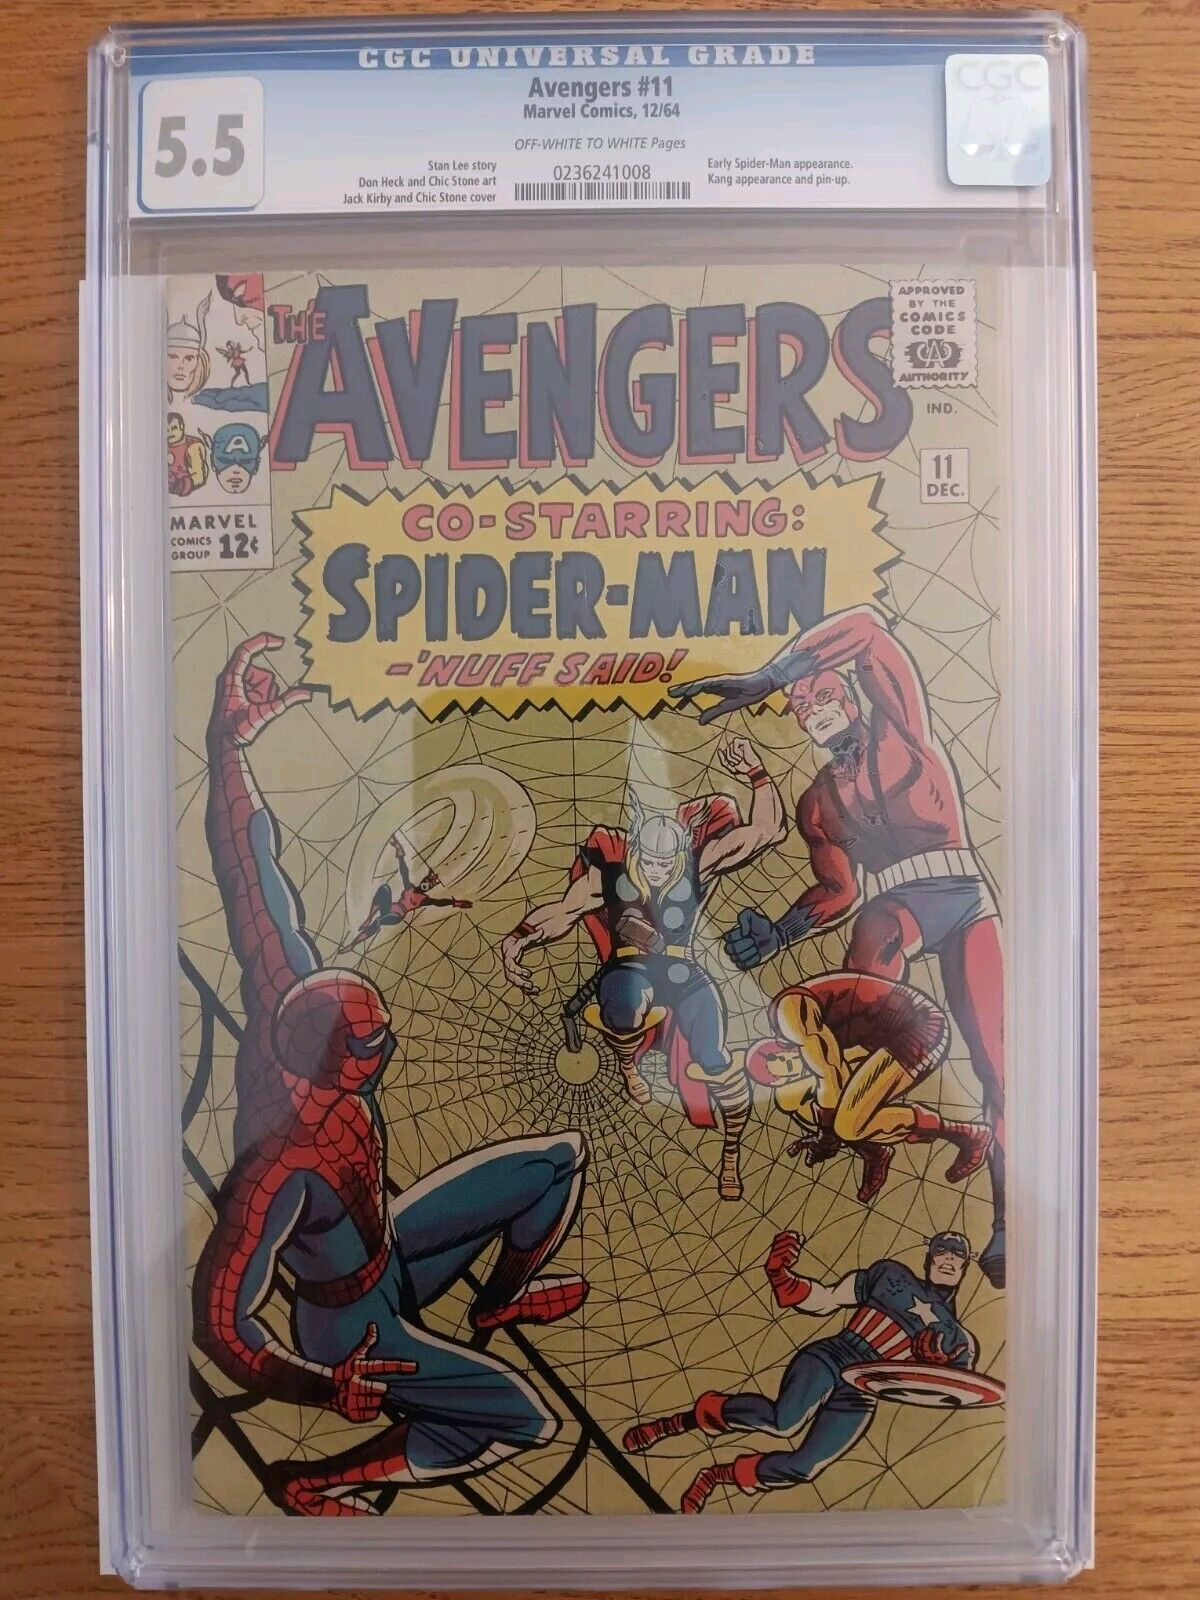 Avengers # 11 CGC 5.5 OW/W Key Early Spider-Man Kang 1964 Stan Lee Jack Kirby